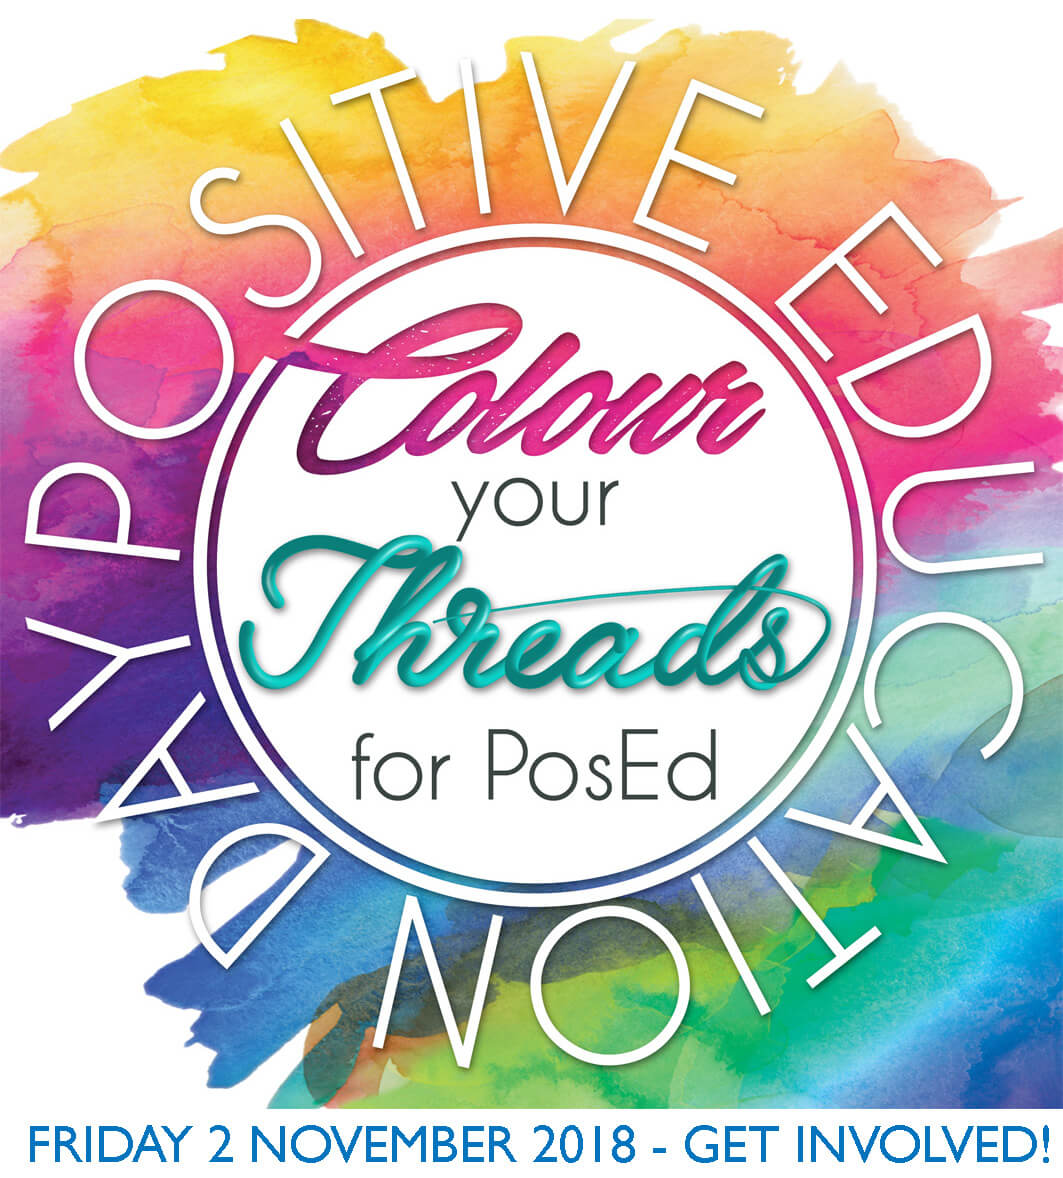 Colour your threads for PosEd logo sml 2018 date